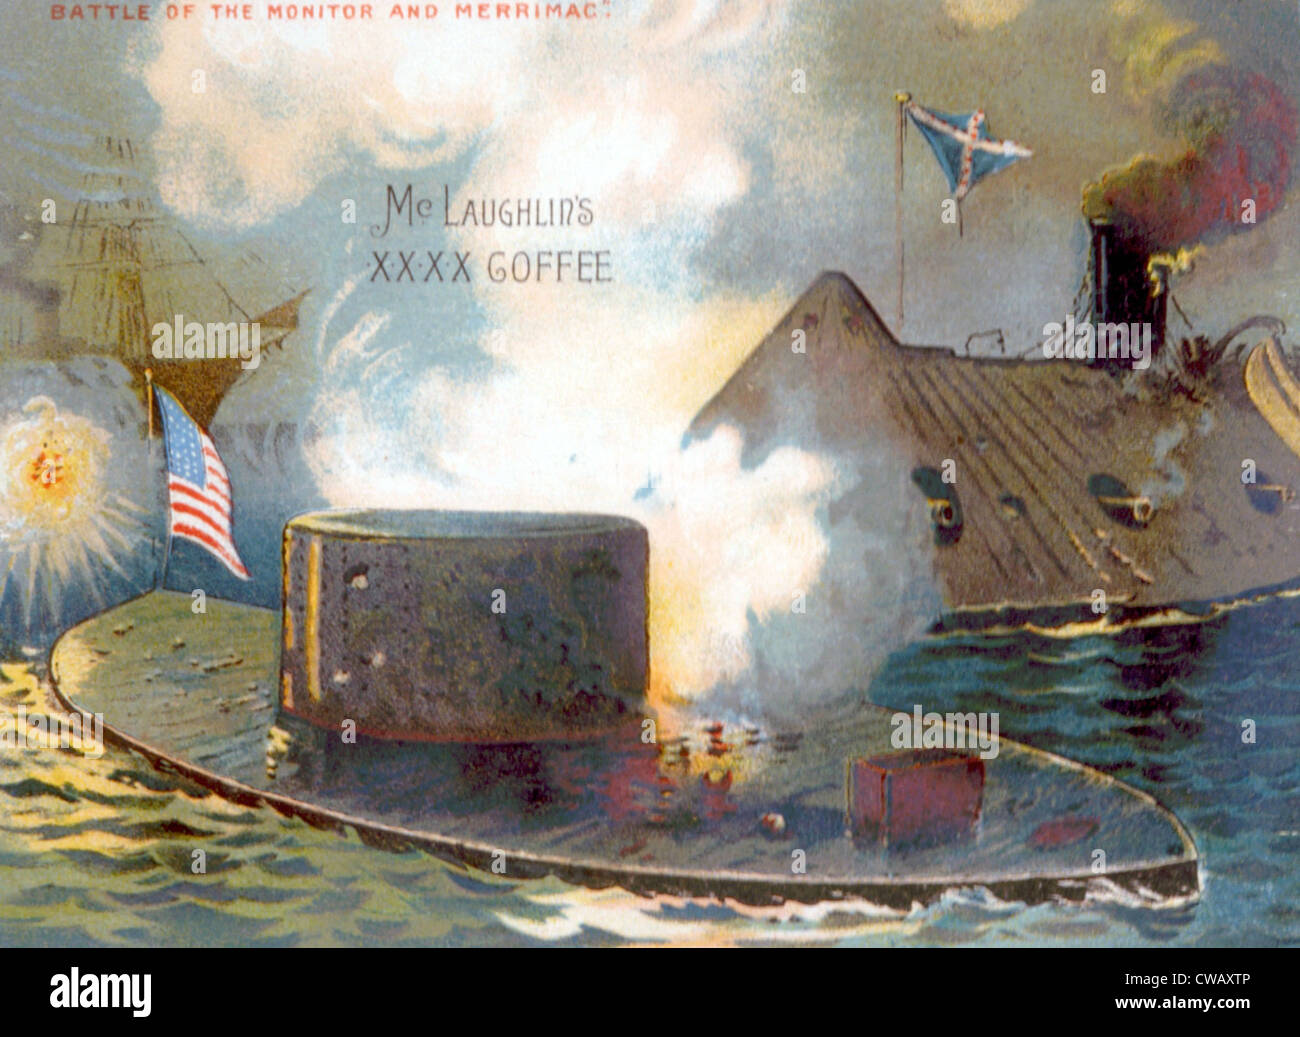 The Battle of the Monitor and the Merrimack, March 8, 1862, trade card for McLaughlin's coffee published 1889 Stock Photo